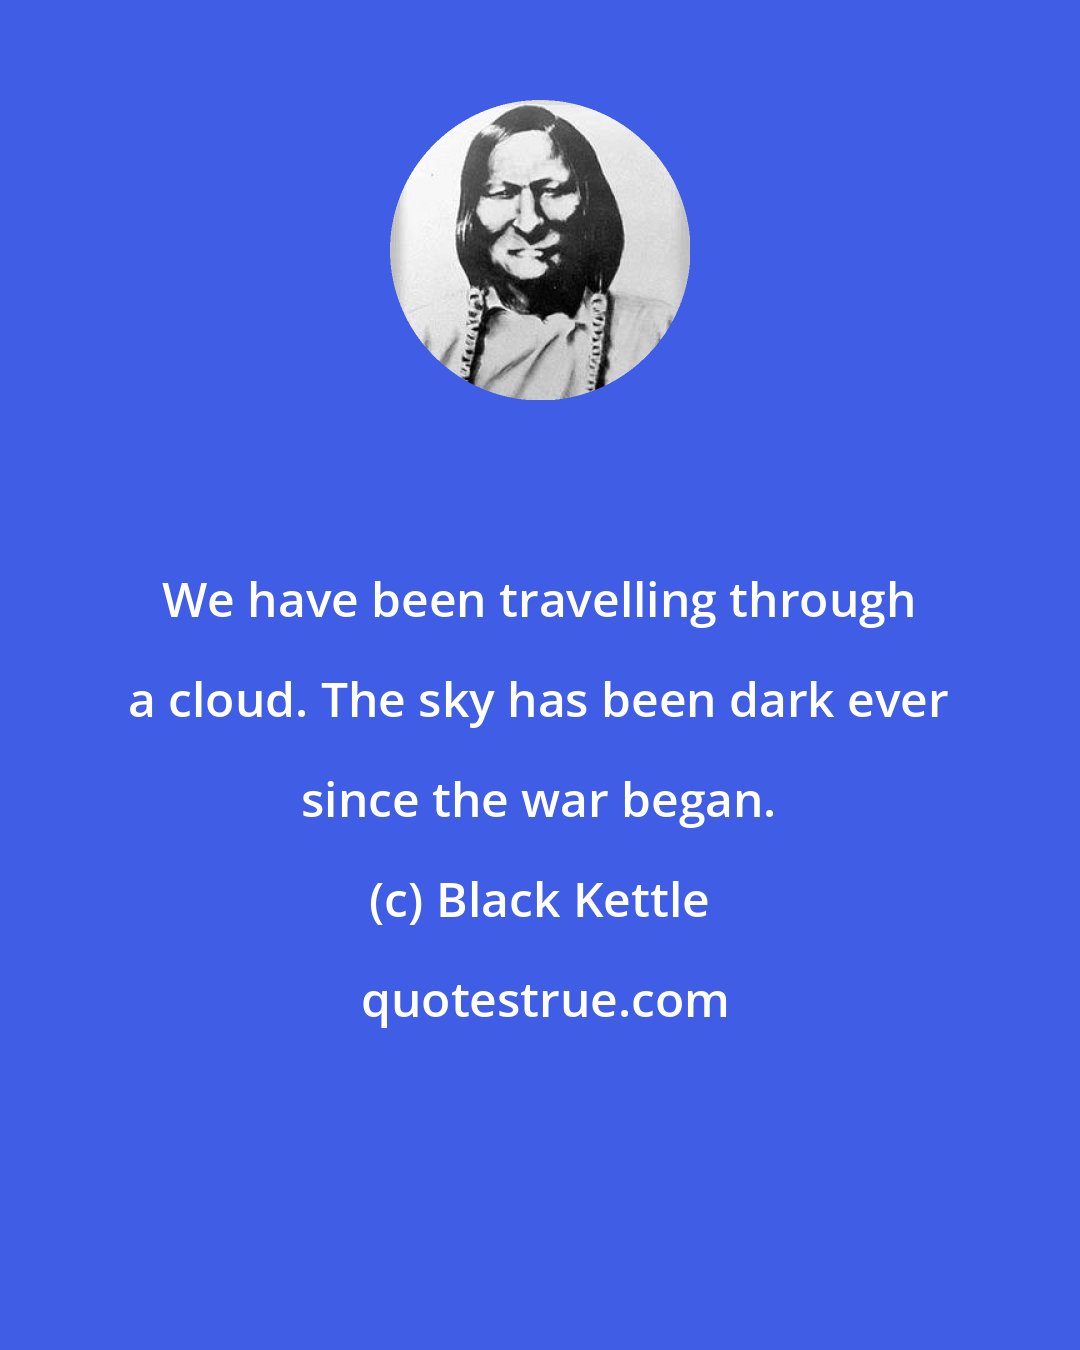 Black Kettle: We have been travelling through a cloud. The sky has been dark ever since the war began.